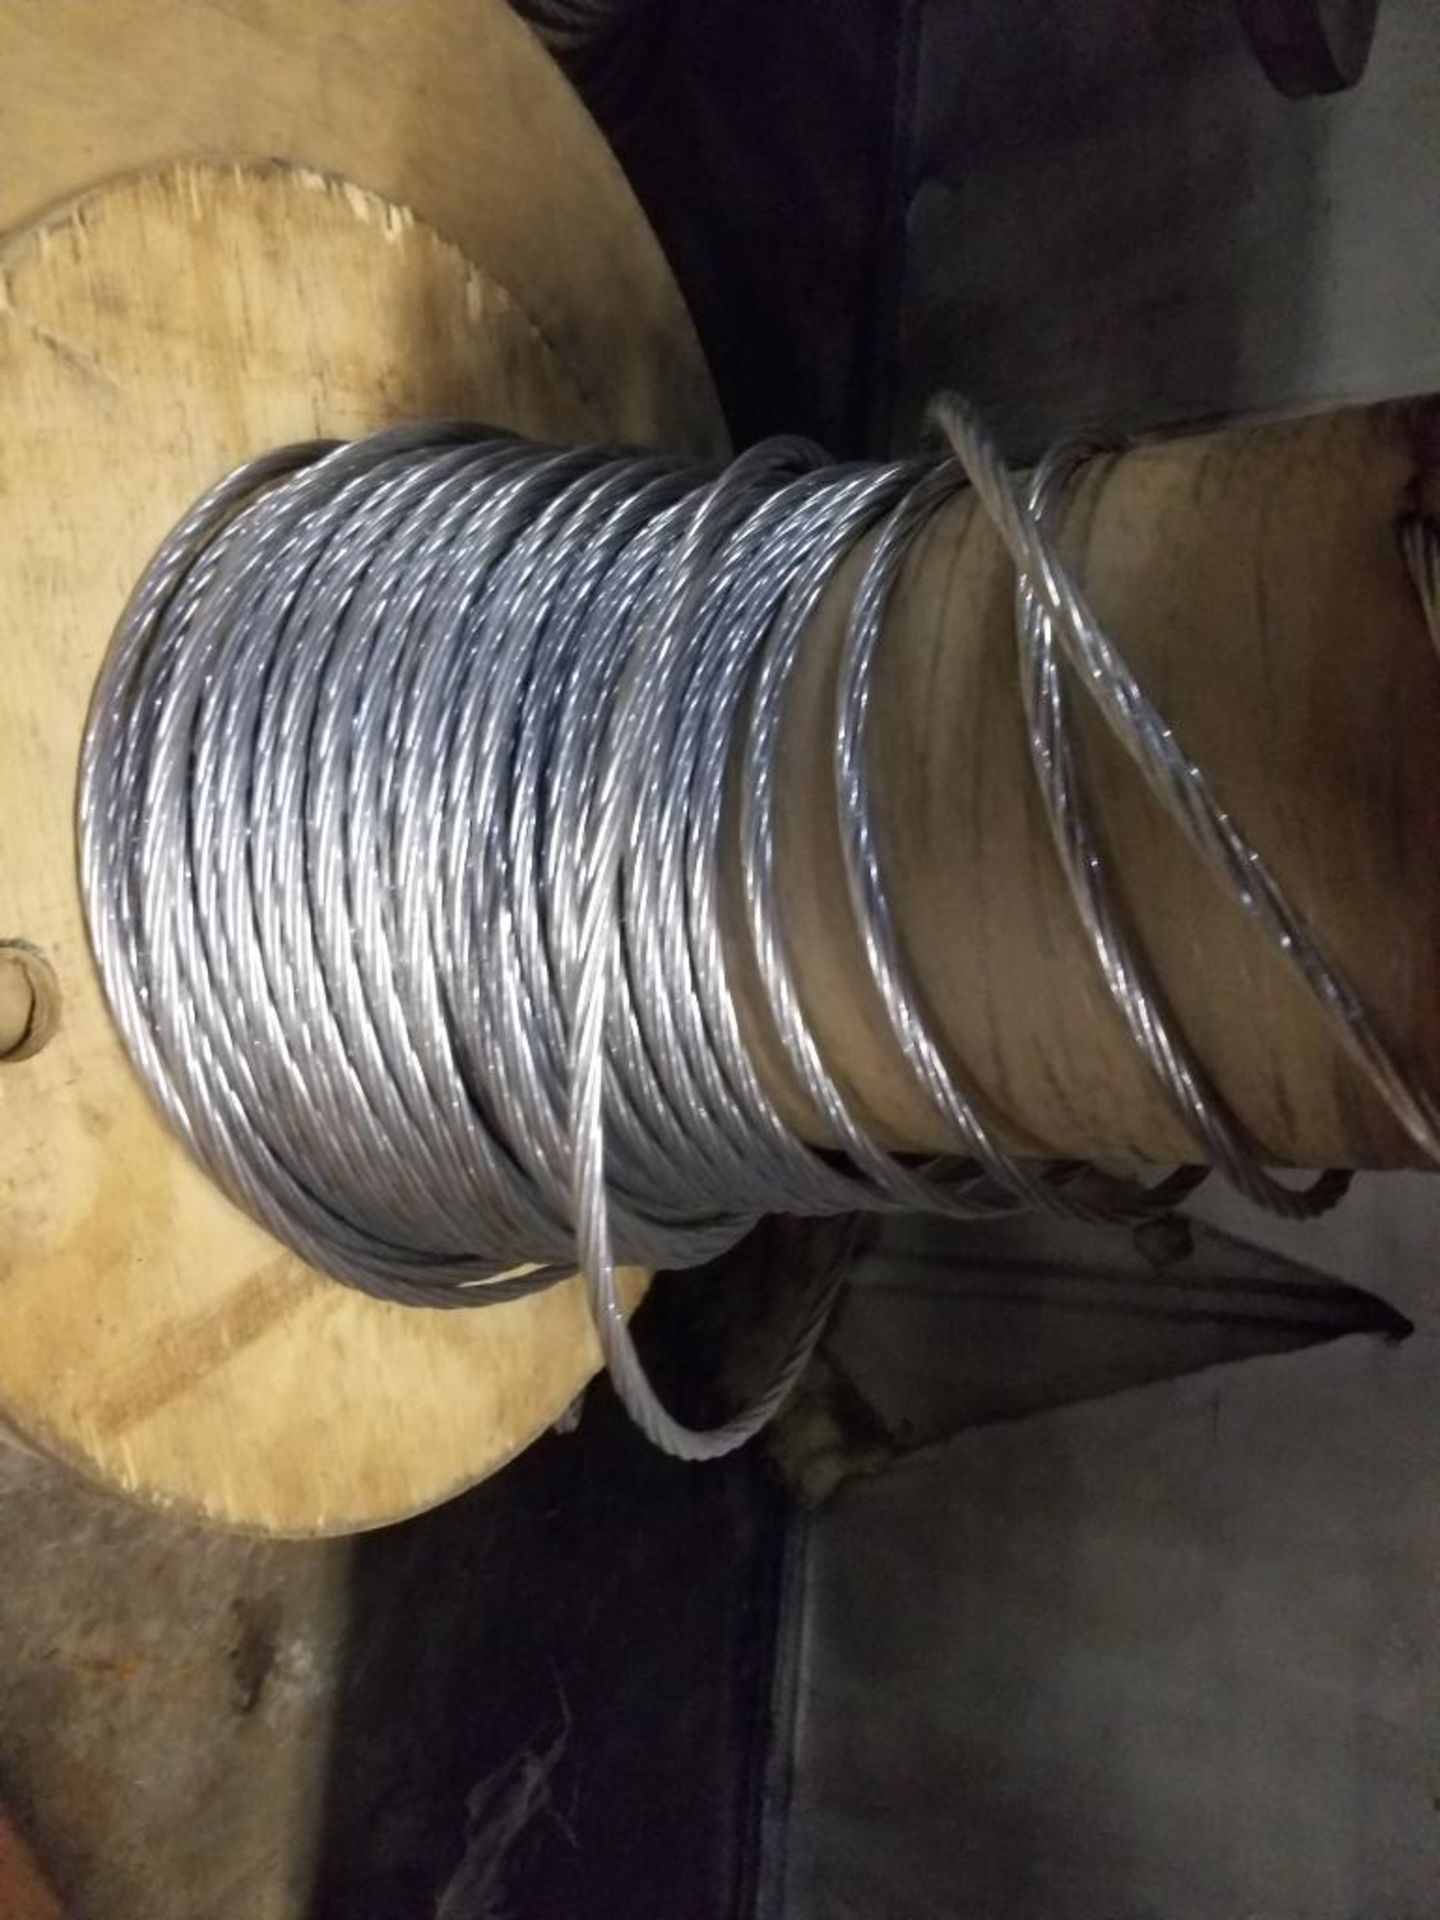 Qty 2 - Spool of bare wire. - Image 2 of 4